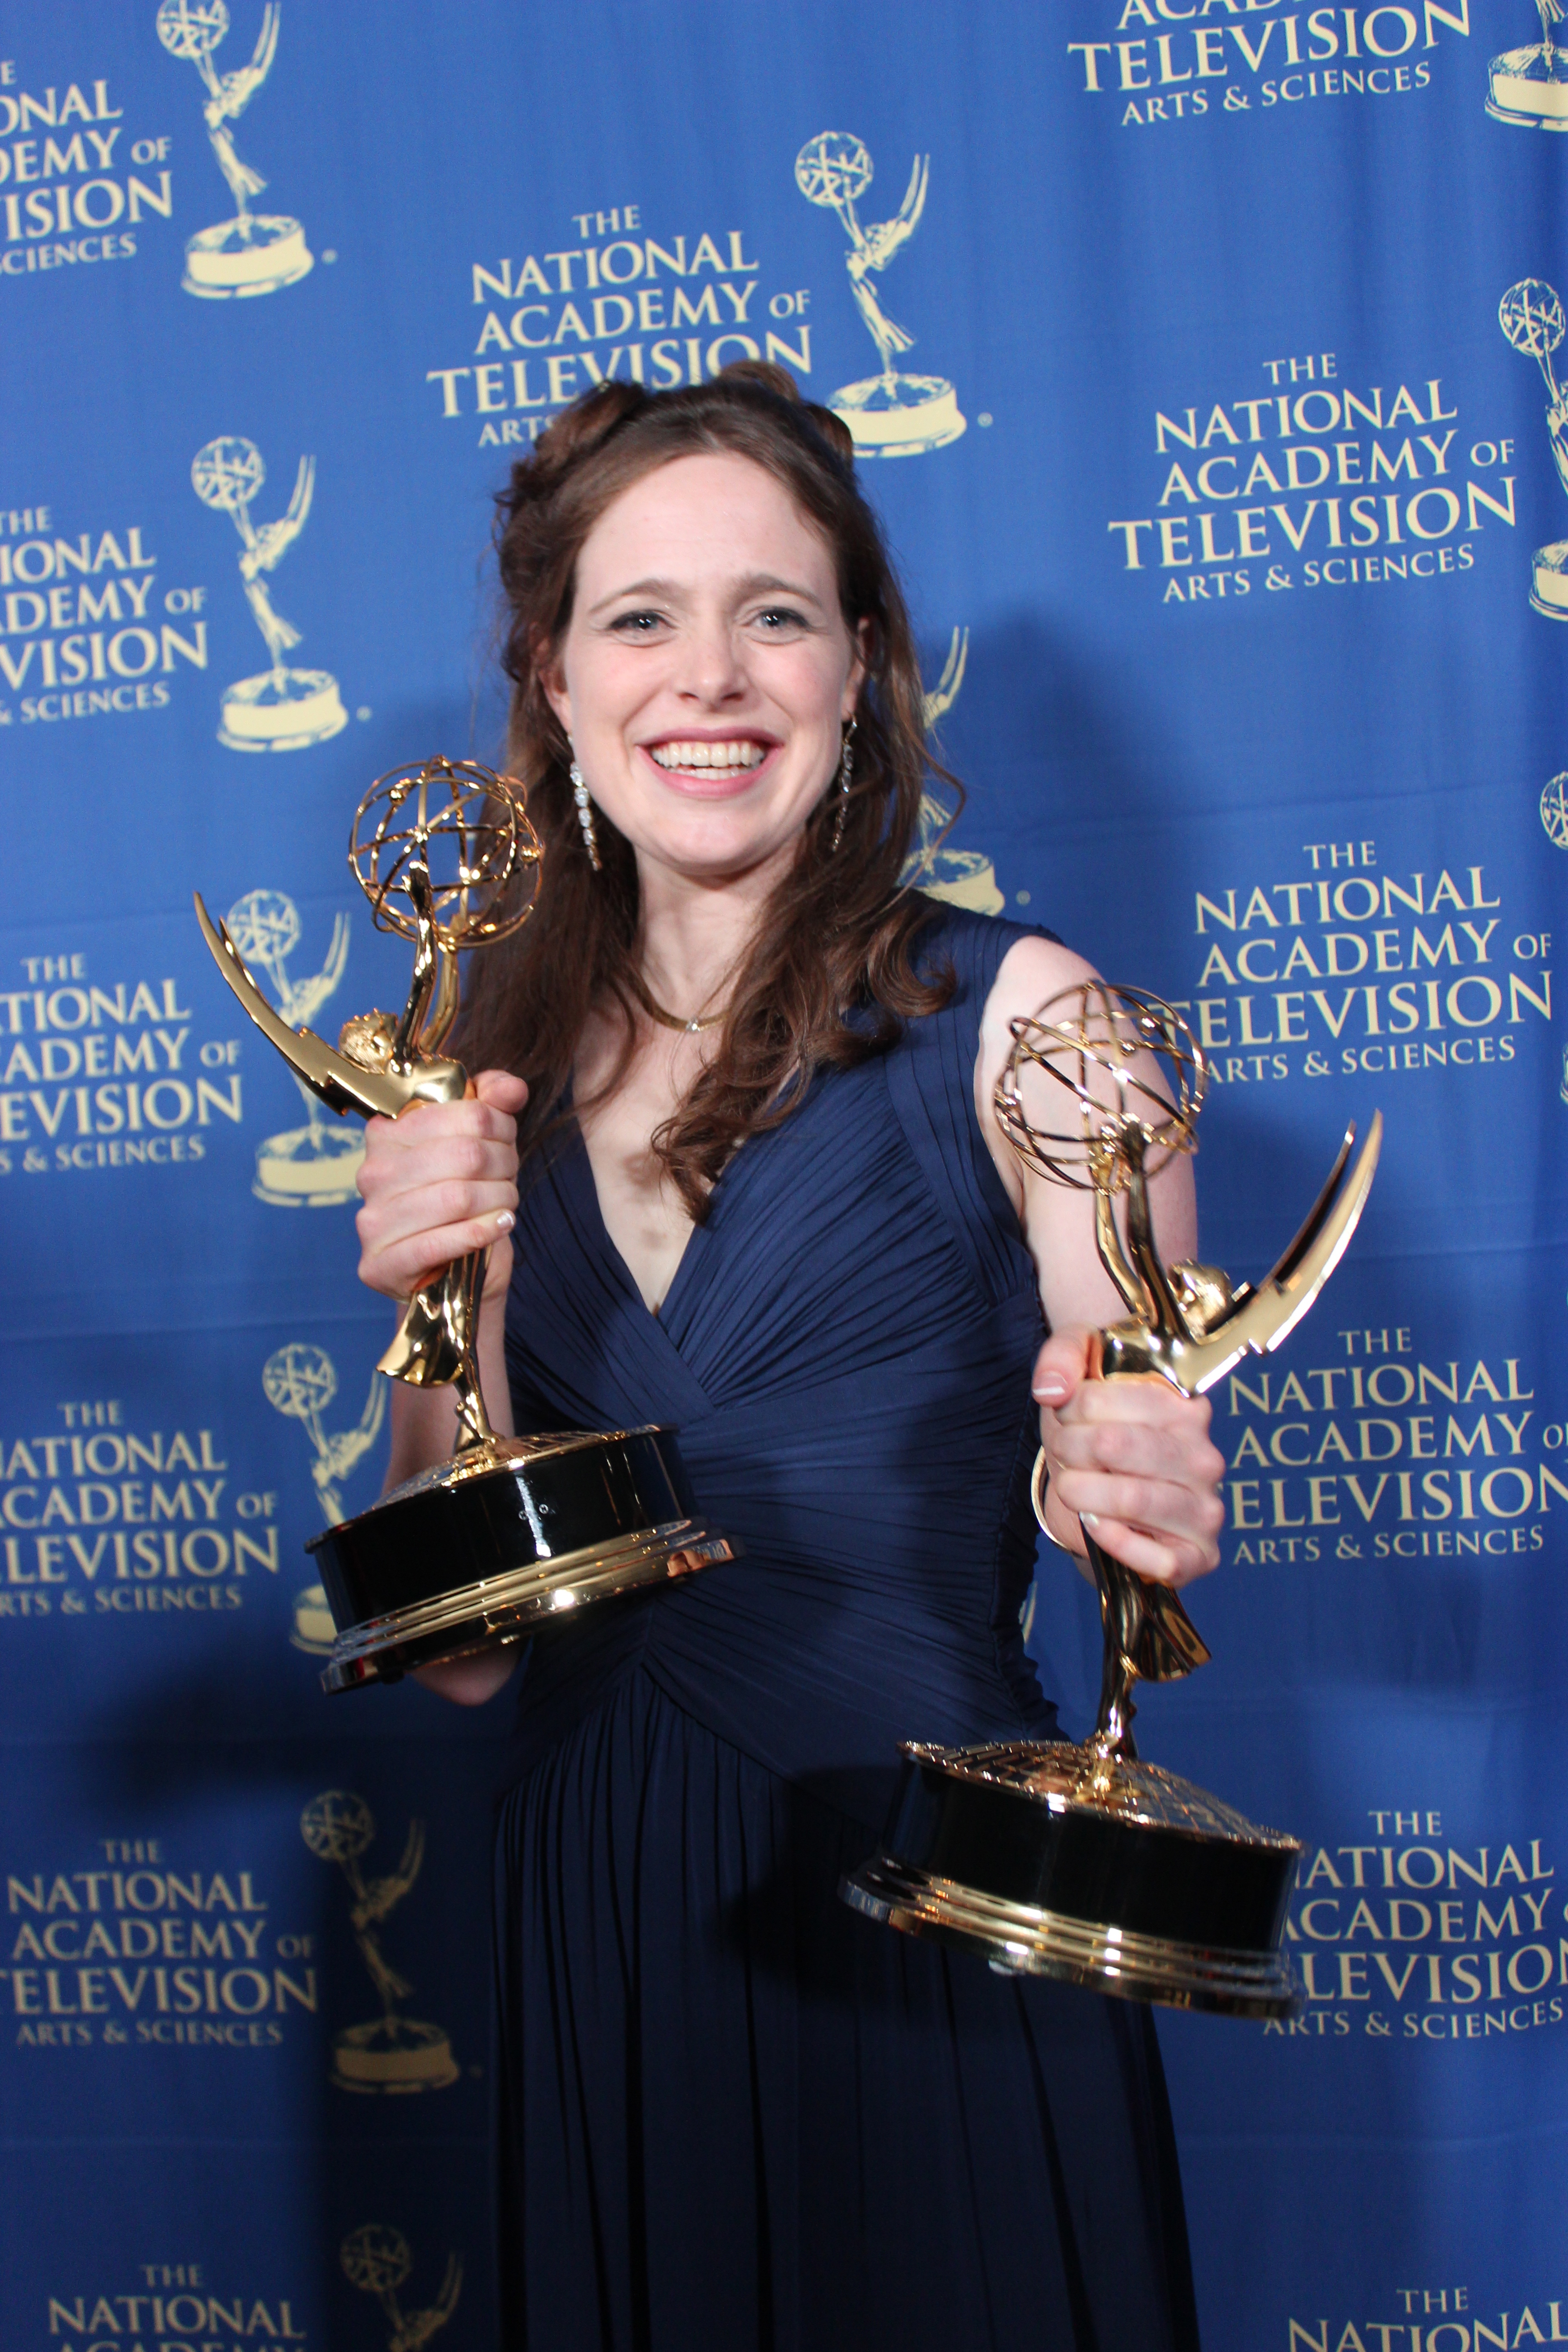 Winner of two 2014 Daytime Emmys, including Outstanding Performer in a Children's Series.